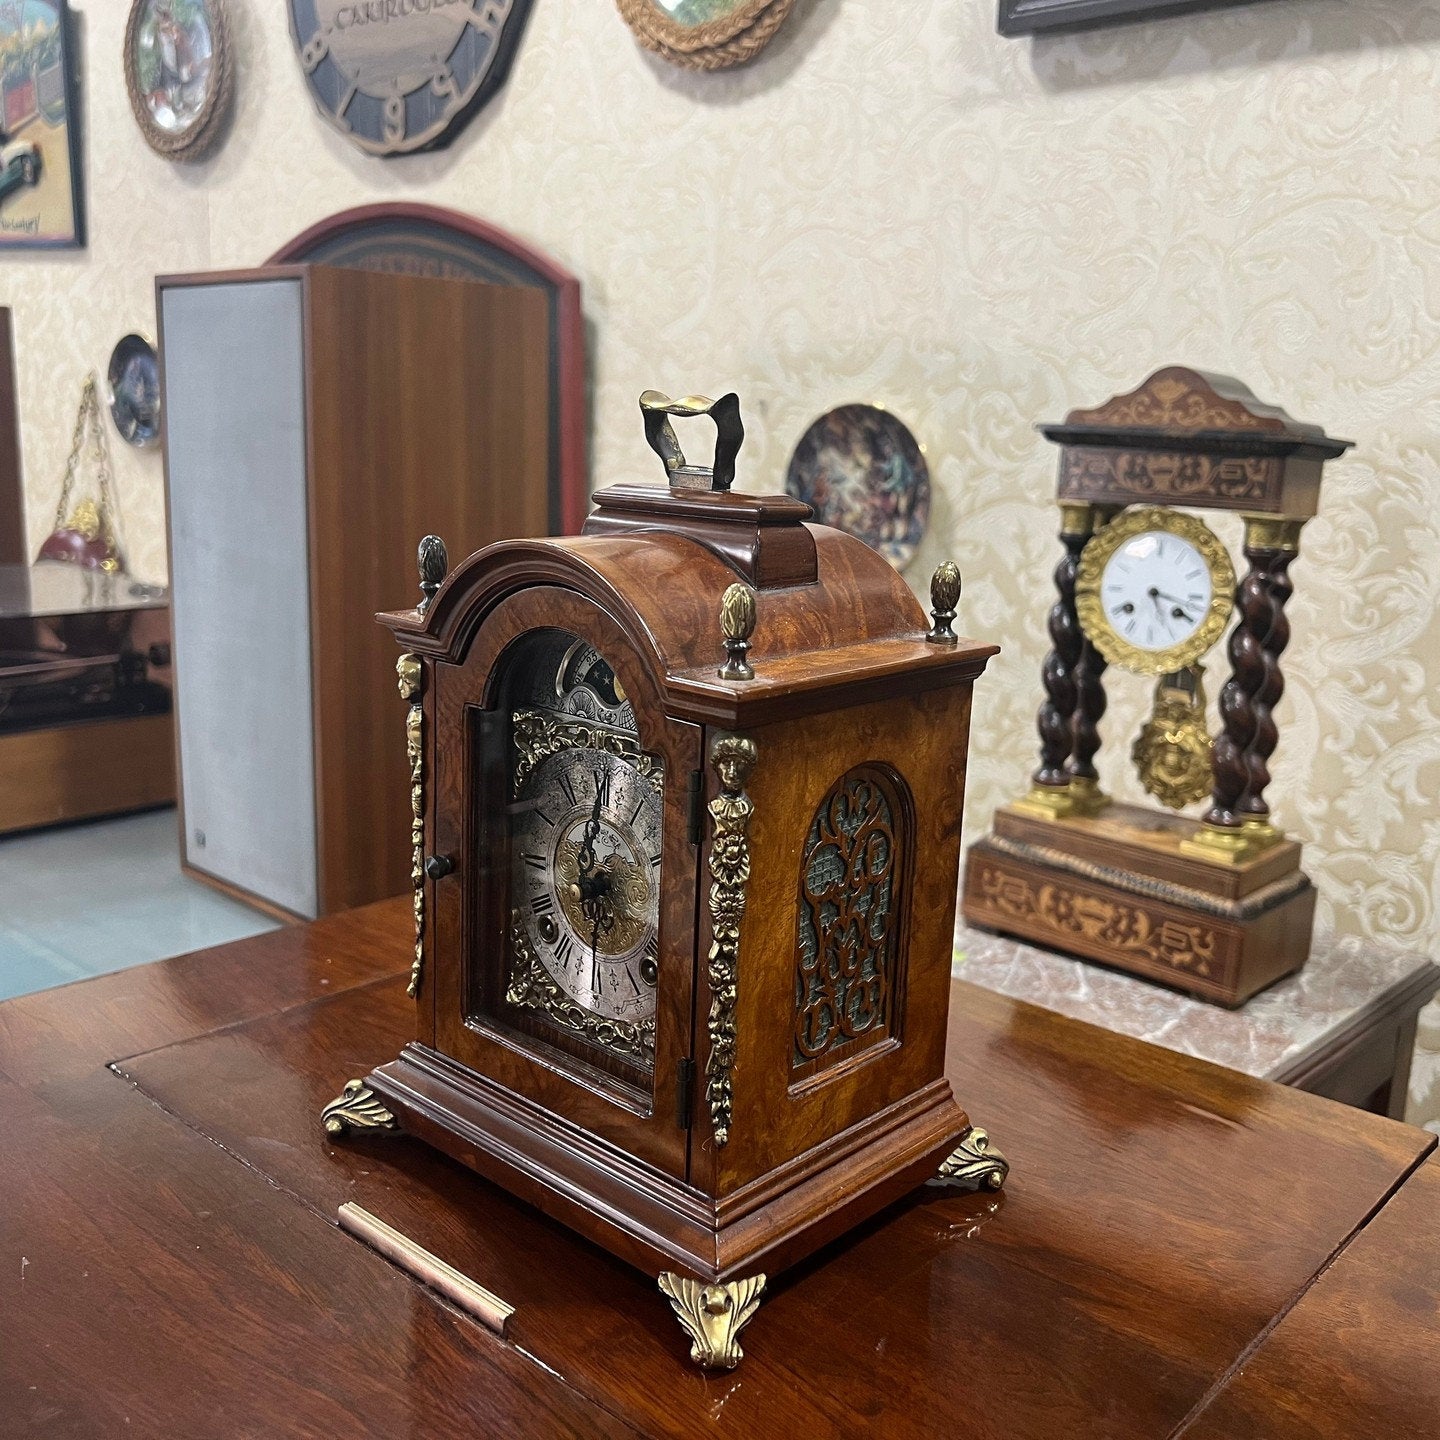 Antique Hermle Double Wind Wood Mantel Clock in perfect condition displayed on wooden table